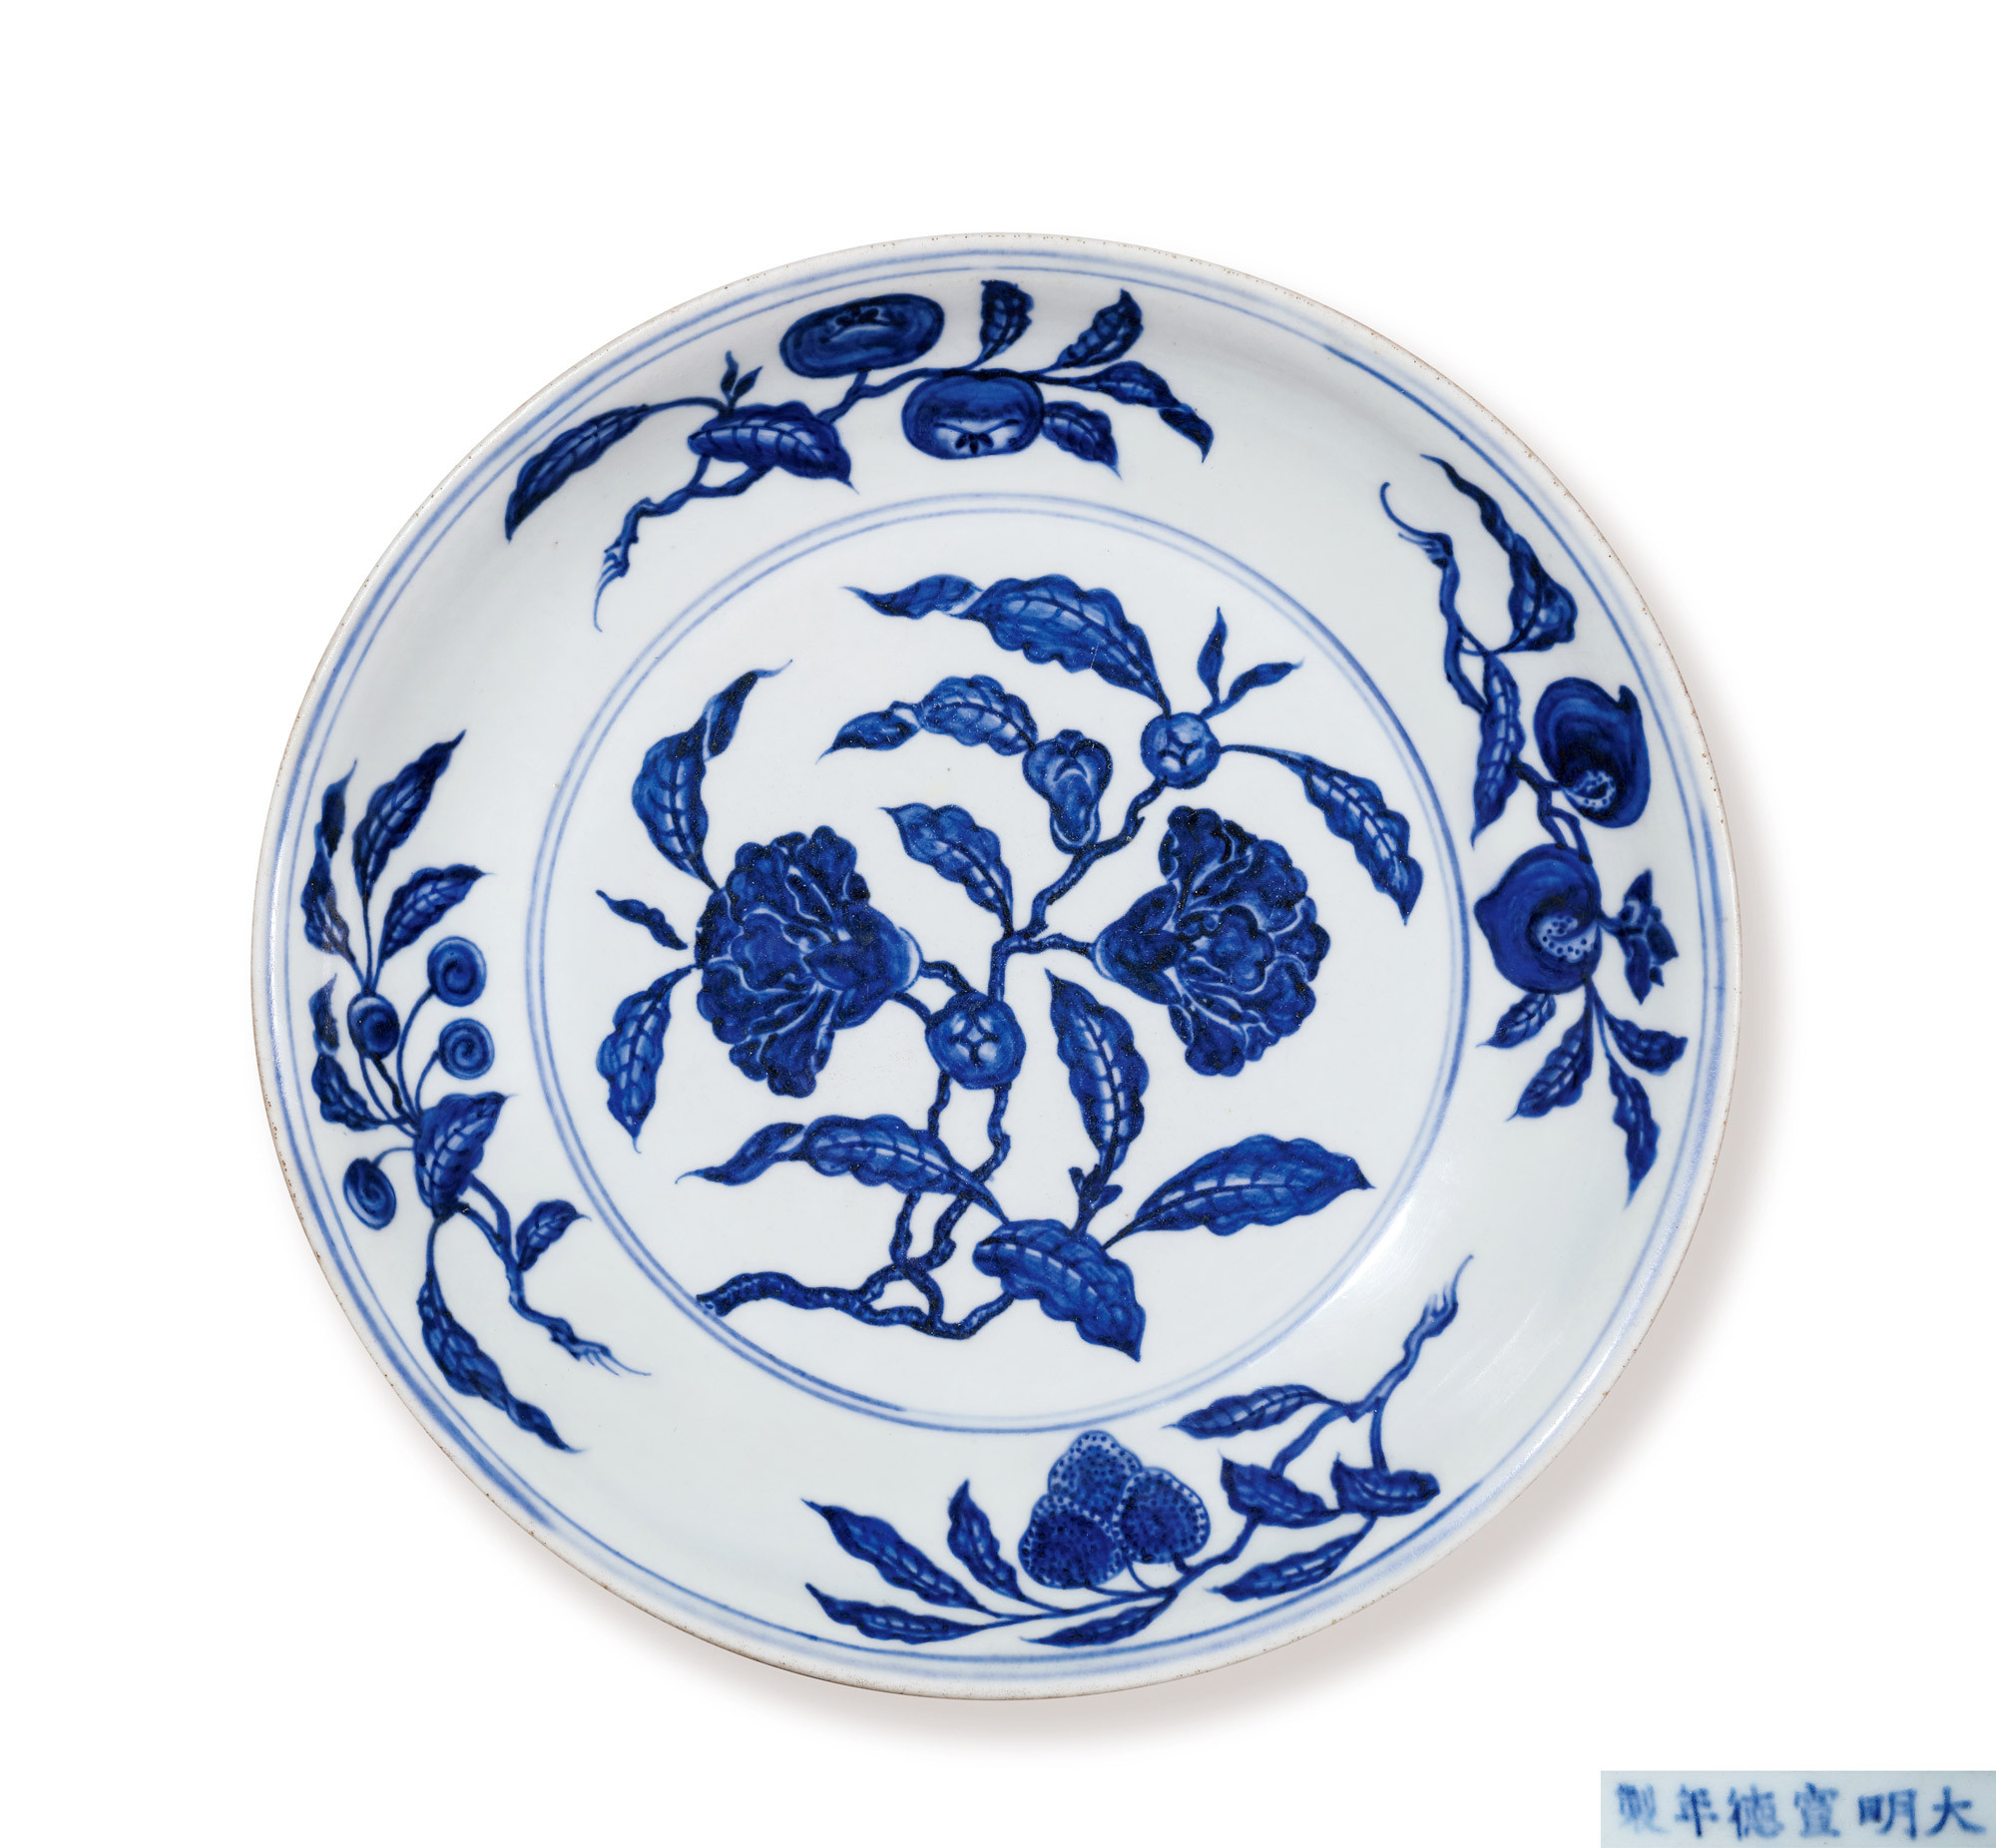 A RARE BLUE AND WHITE ‘FLORAL’ PLATE